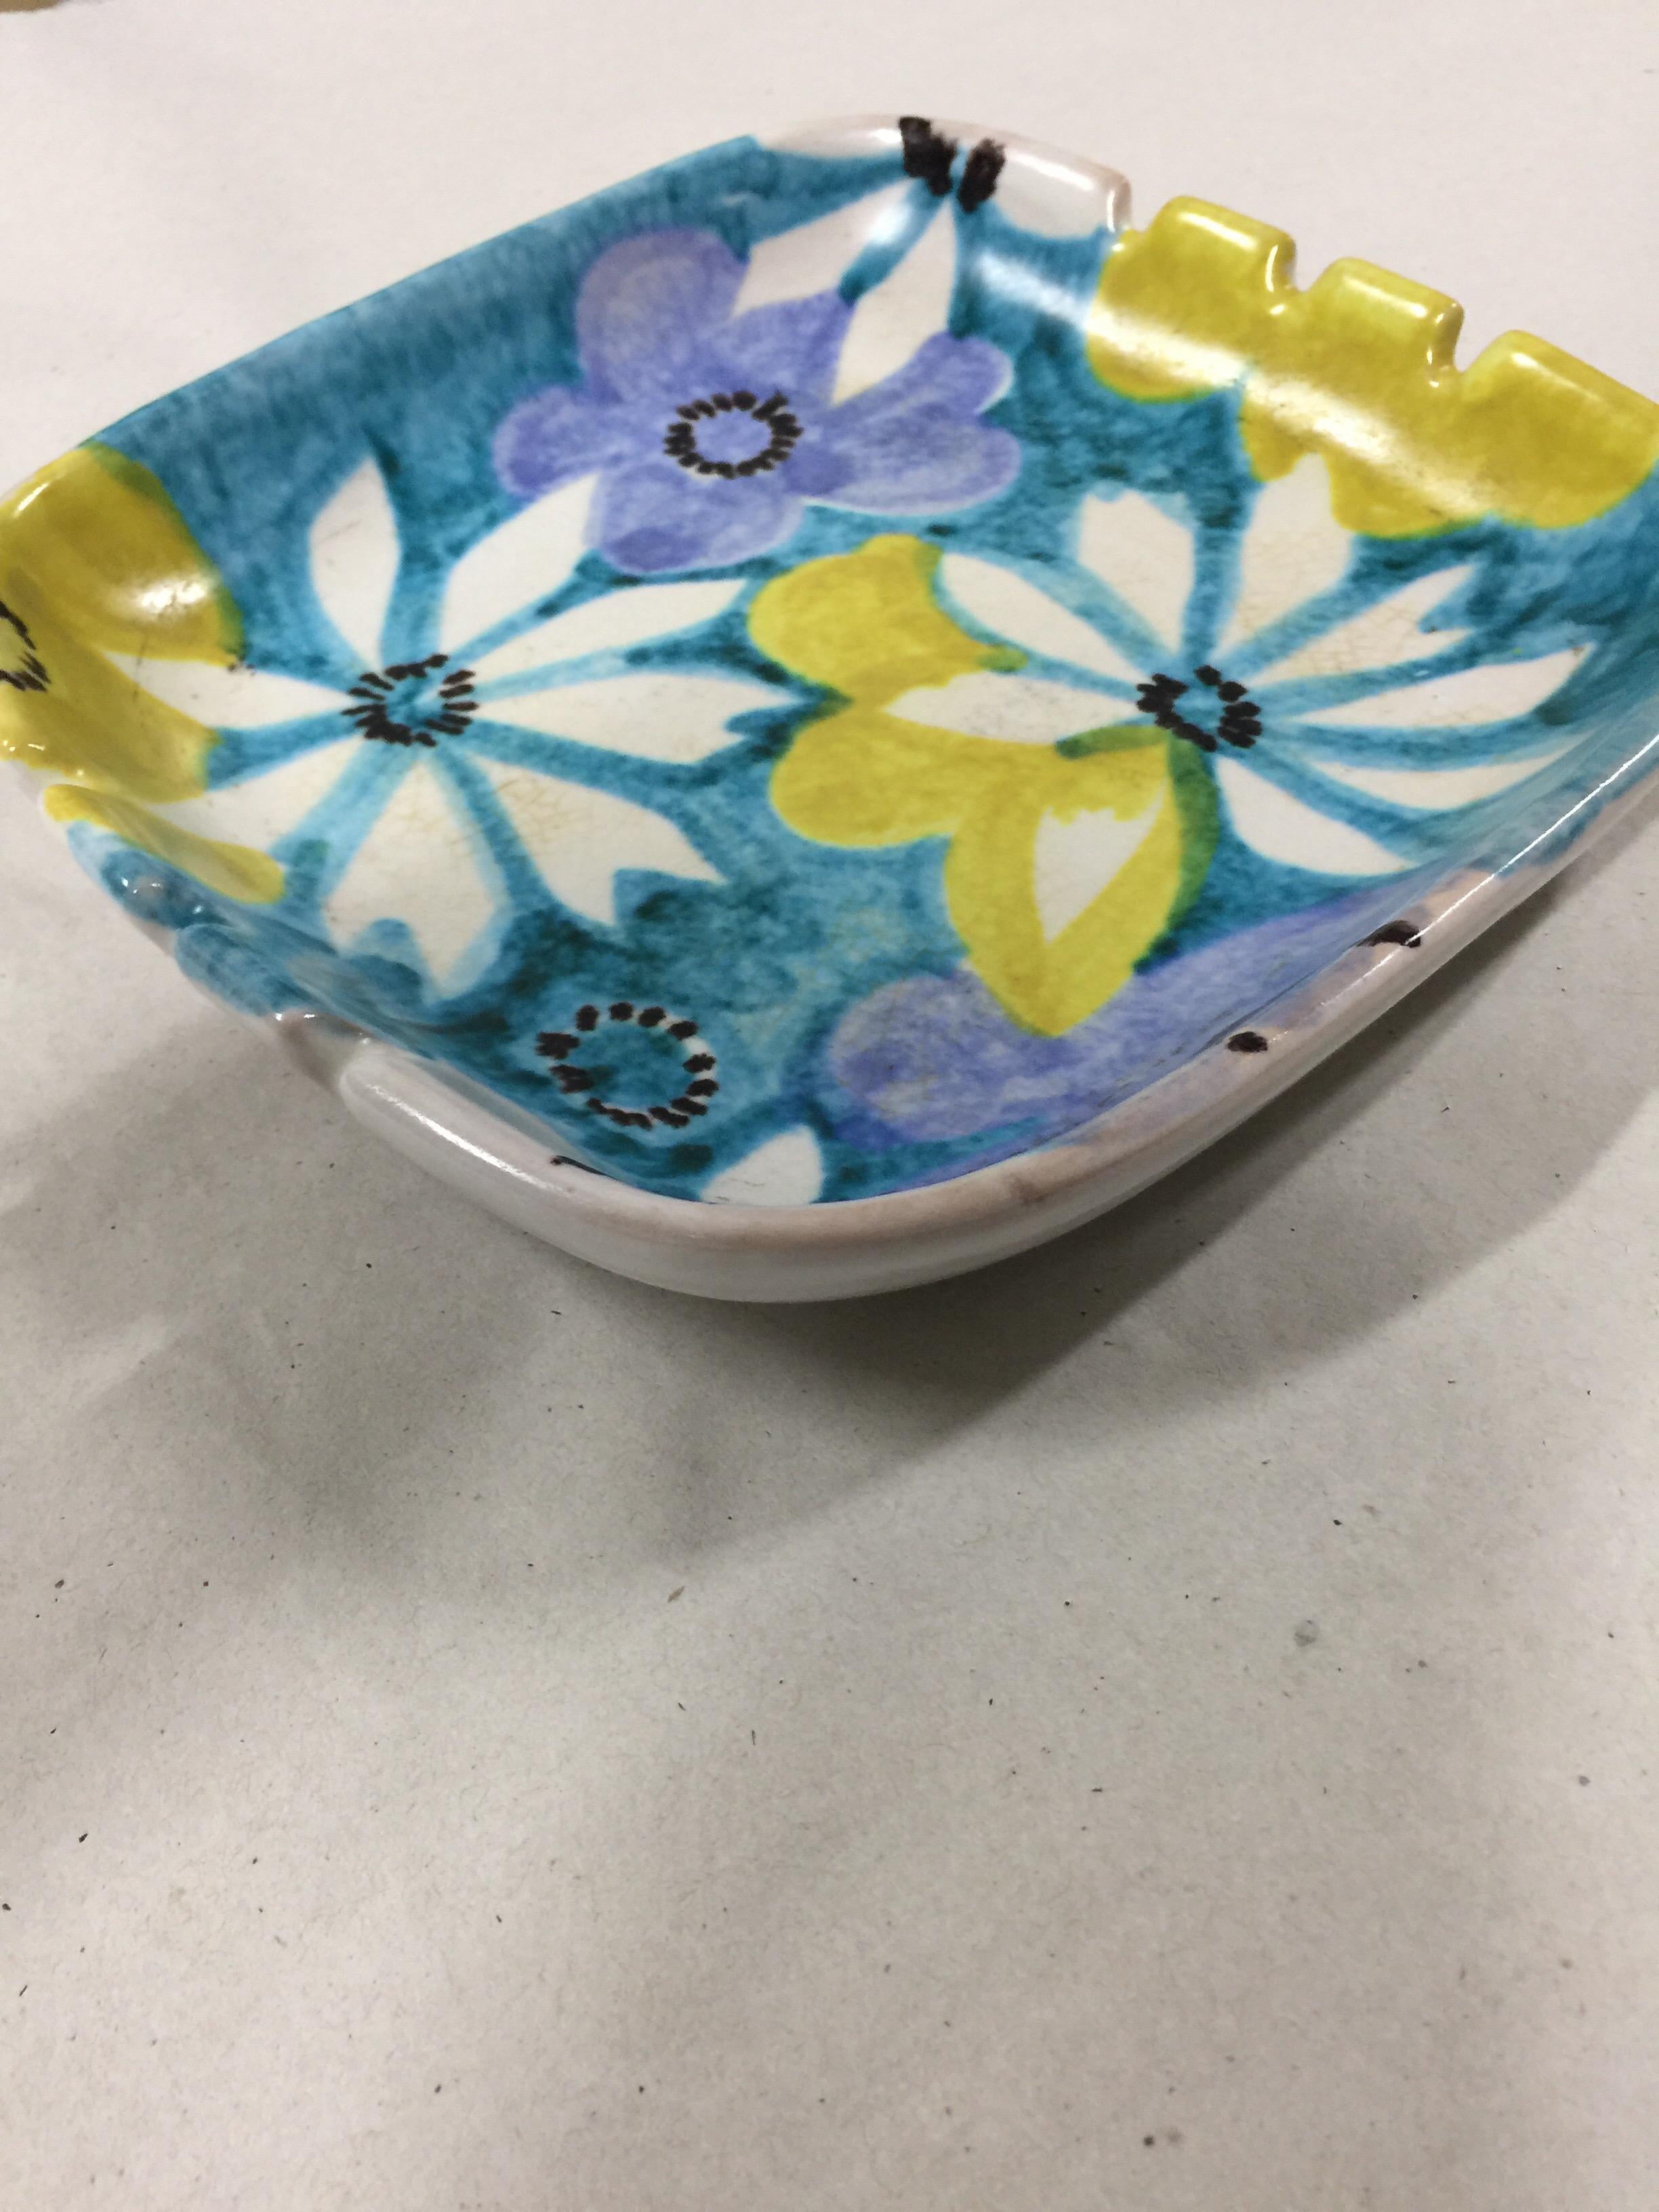 A ceramic ashtray / bowl with a signature hand-painted floral pattern made by Raymor, Italy, circa 1950. Signed with sticker and marking.

Measures 7.5 inches x 7.5 inches square x 1.5 inches high.

May be viewed at our location at the NYDC